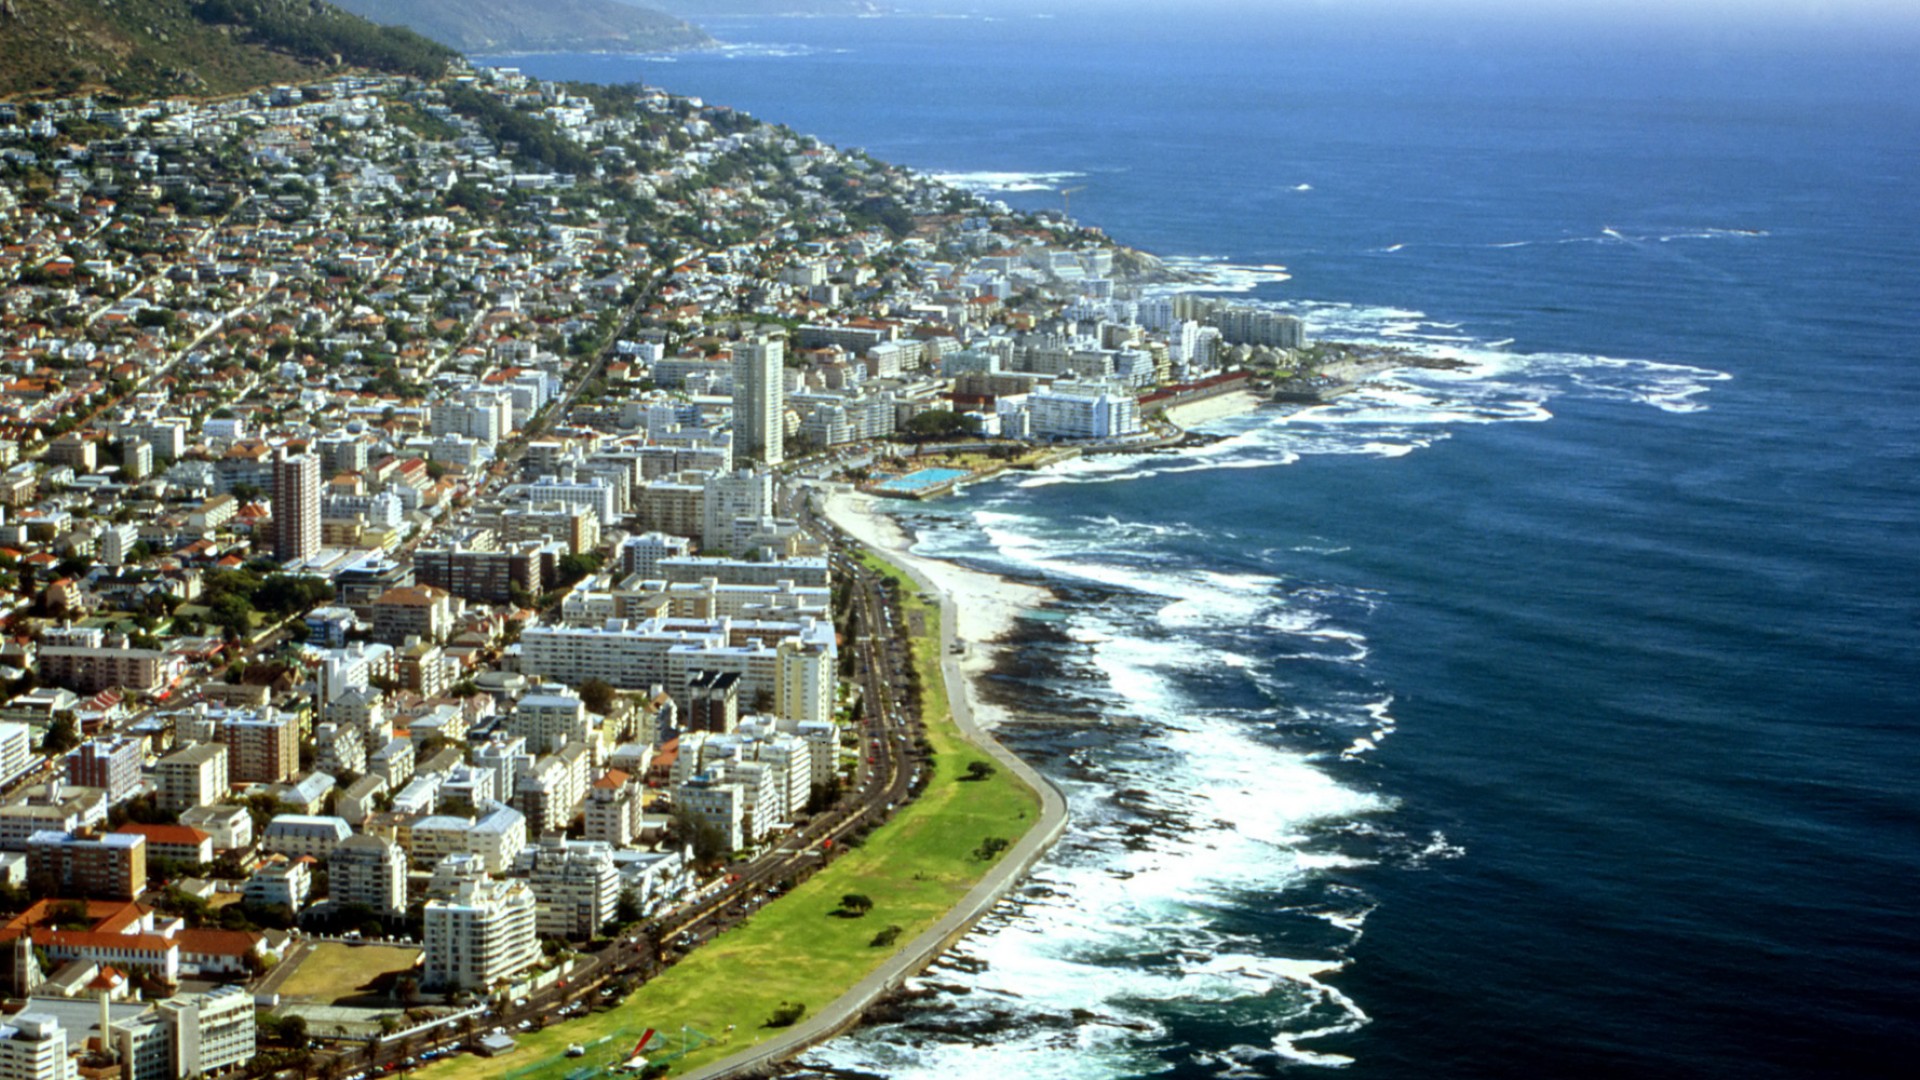 Birds eye view of cape town, South Africa with the coastline